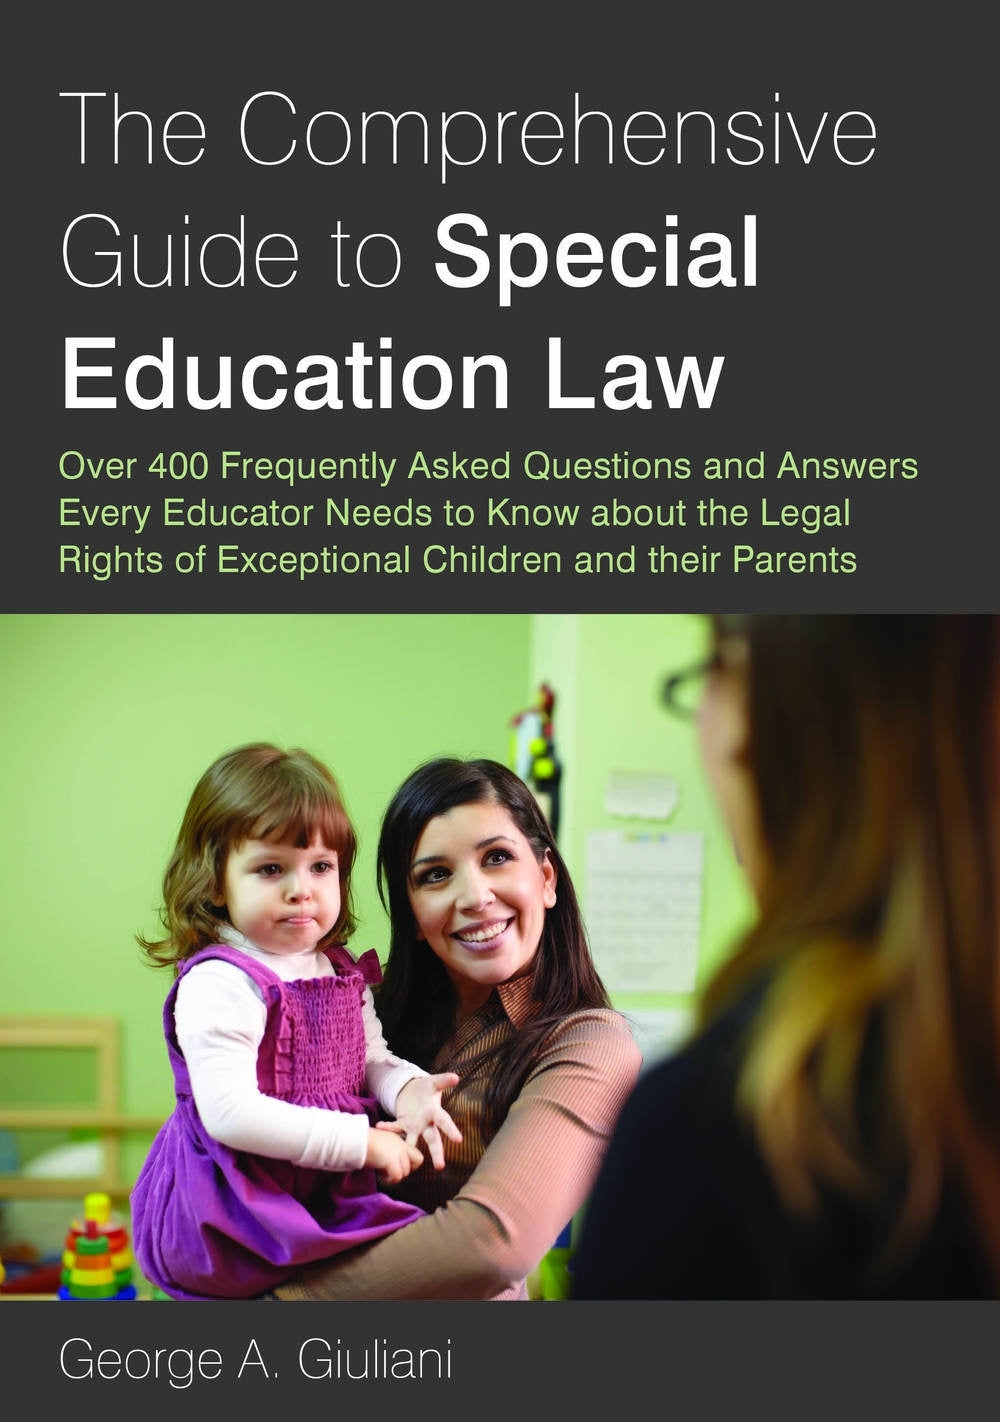 The Comprehensive Guide to Special Education Law by George A. Giuliani